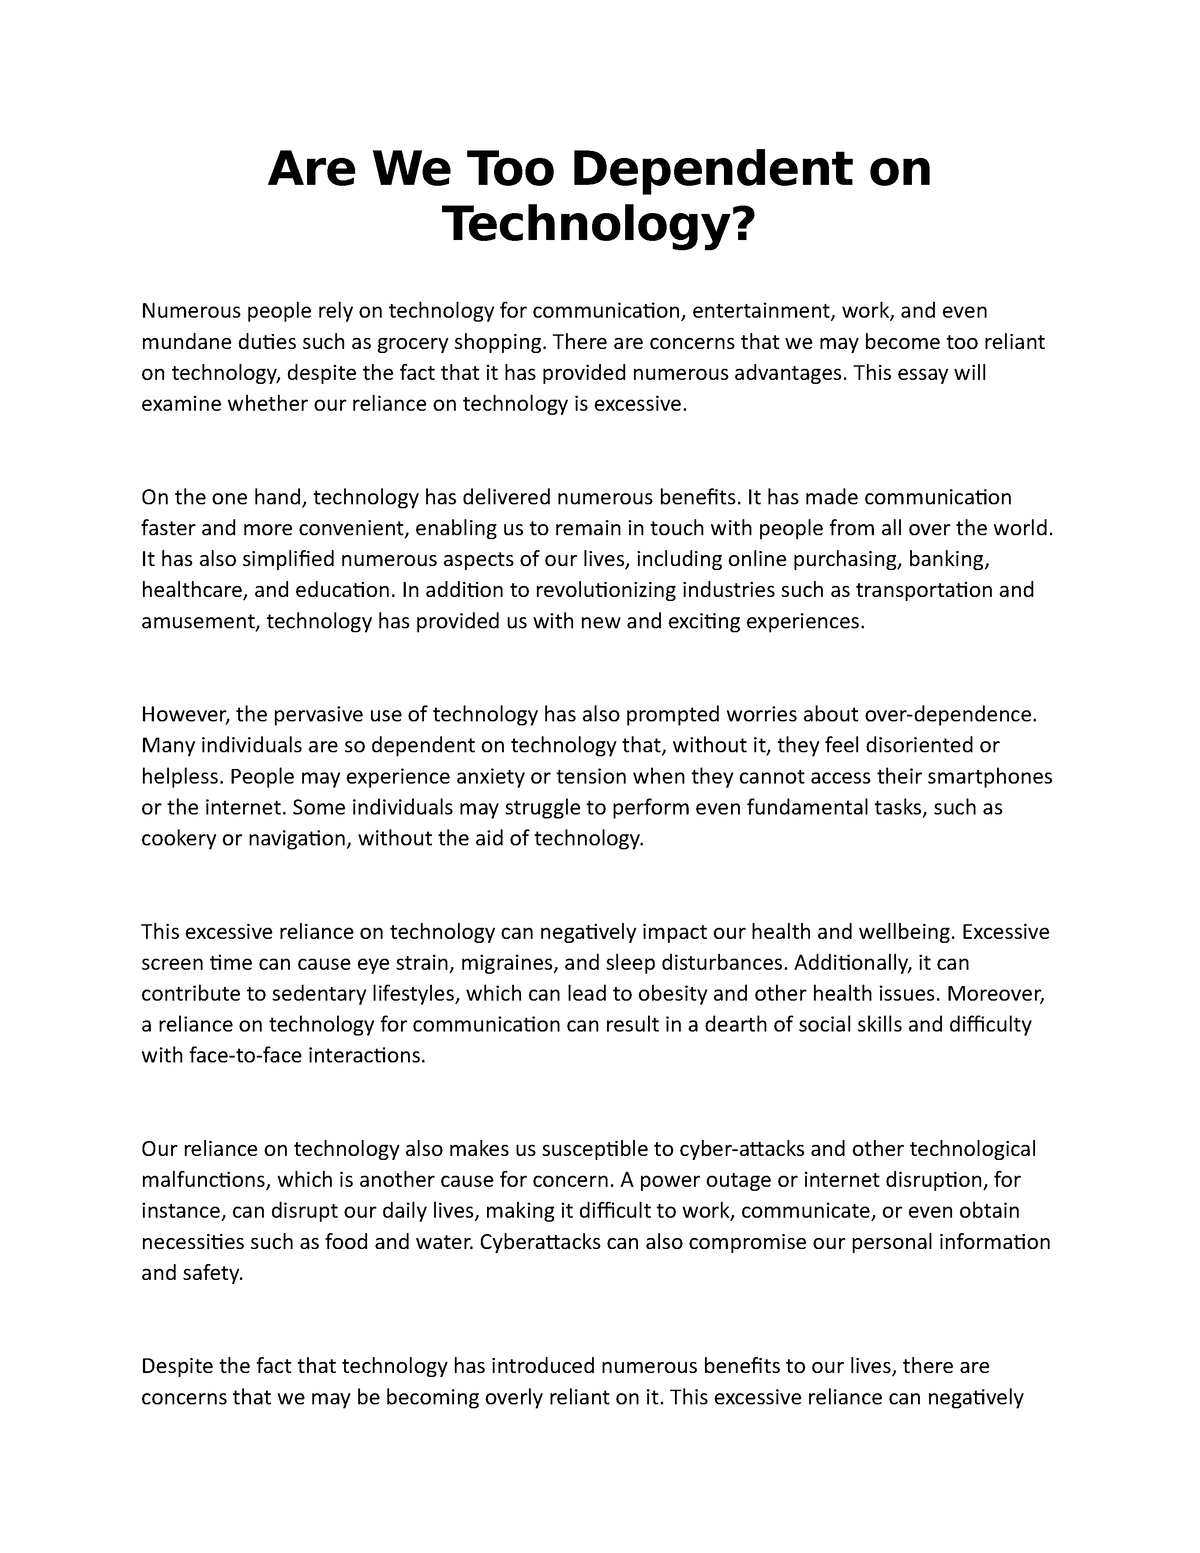 human dependence on technology essay